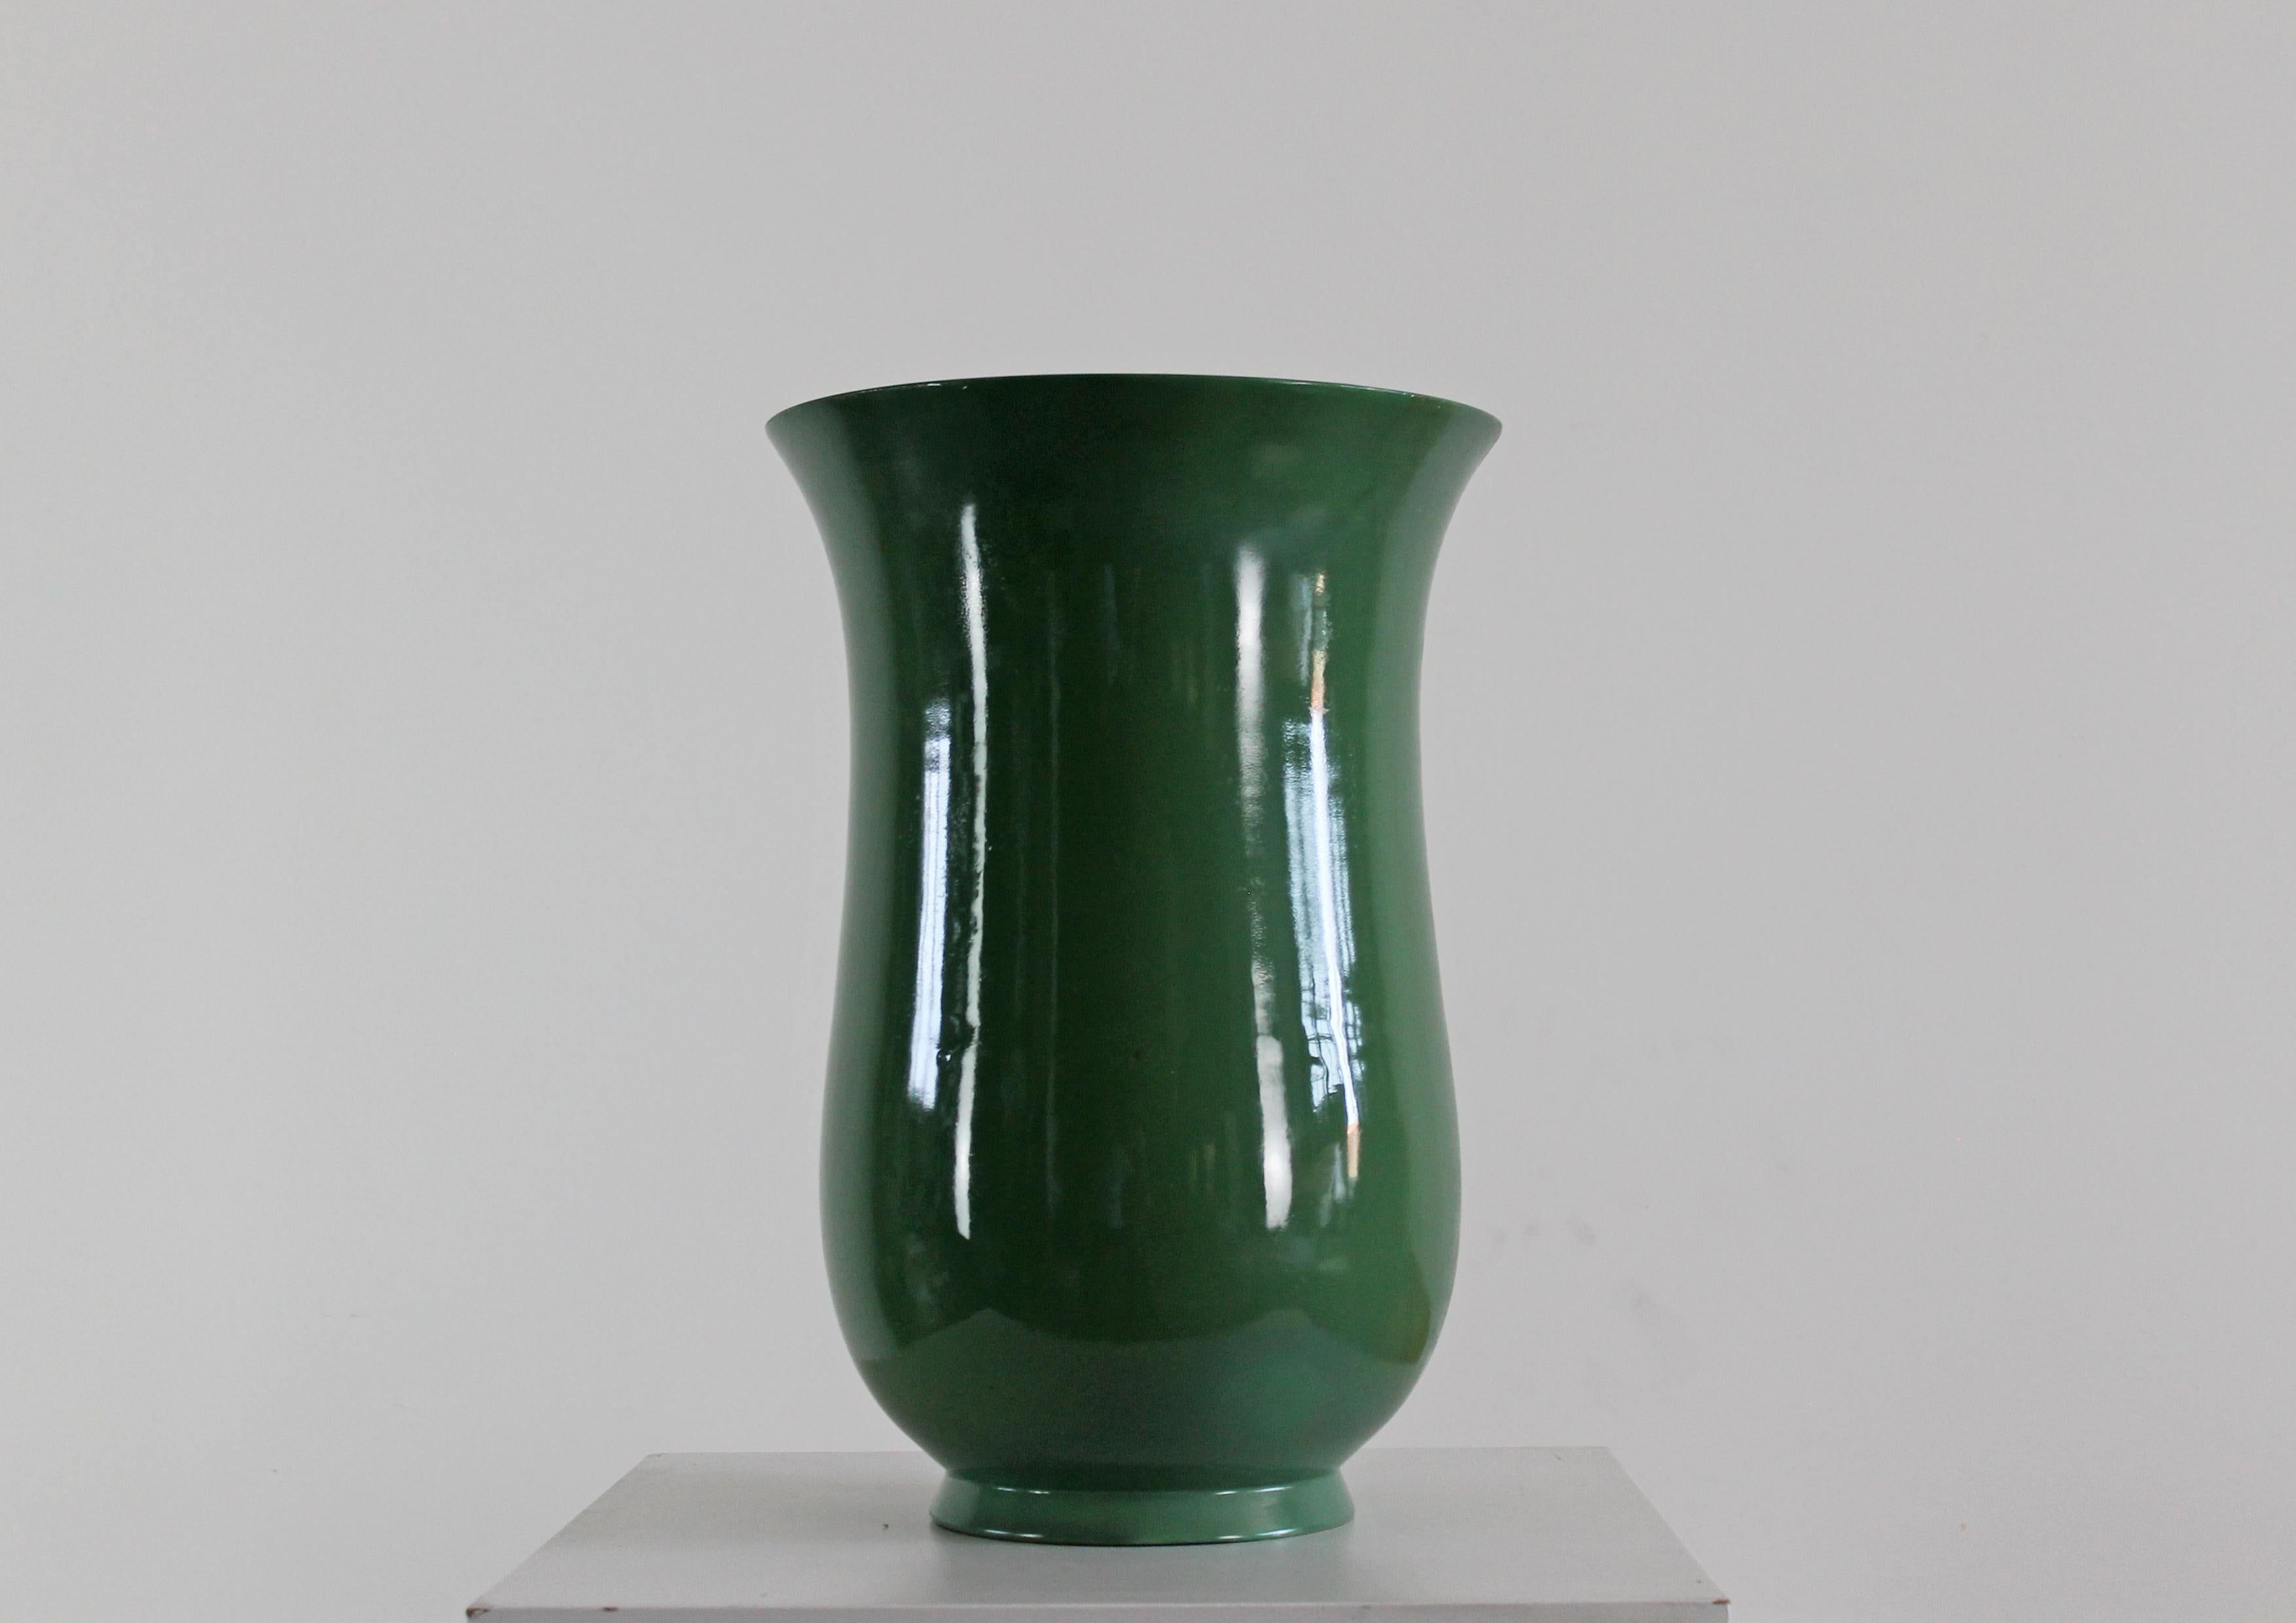 Rare large vase in green ceramic designed by the Italian designer Gio Ponti and manufactured by Richard Ginori between the 1930s and the 1940s. 

In this piece, the ceramic was modeled with an elegant and raffinate, flared shape that makes it a